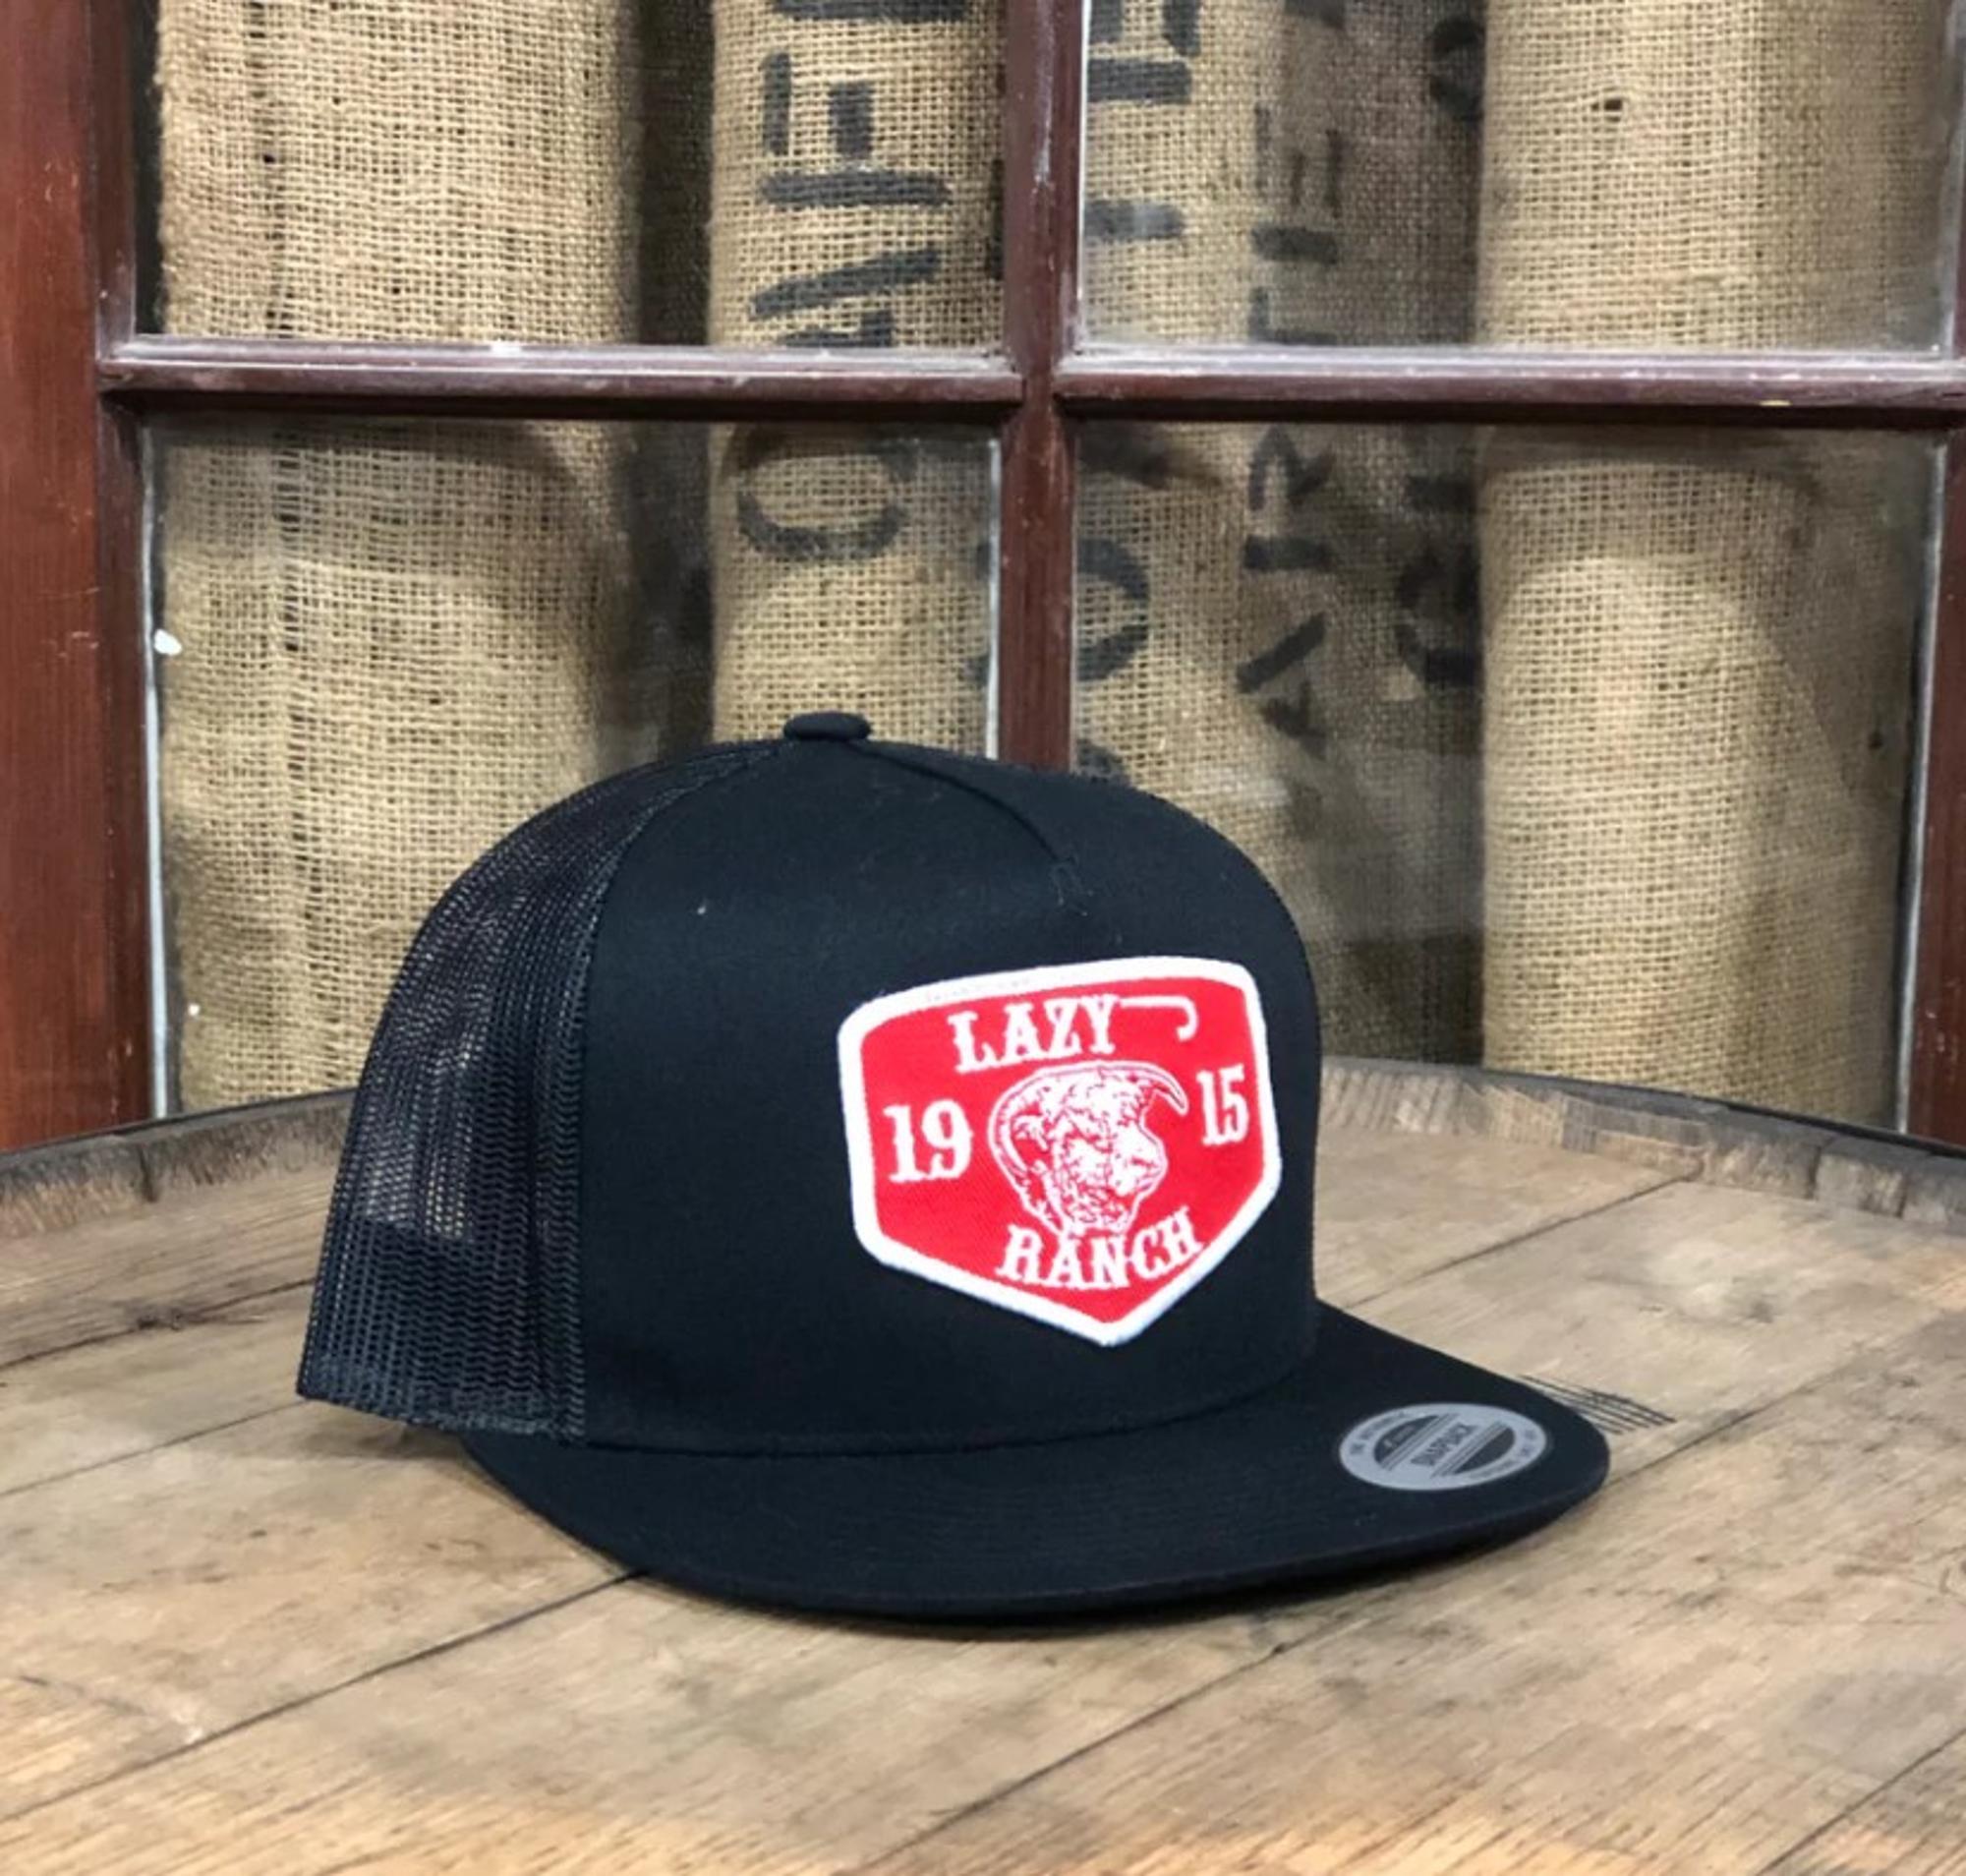 Red Ranch Patch Trucker Hat